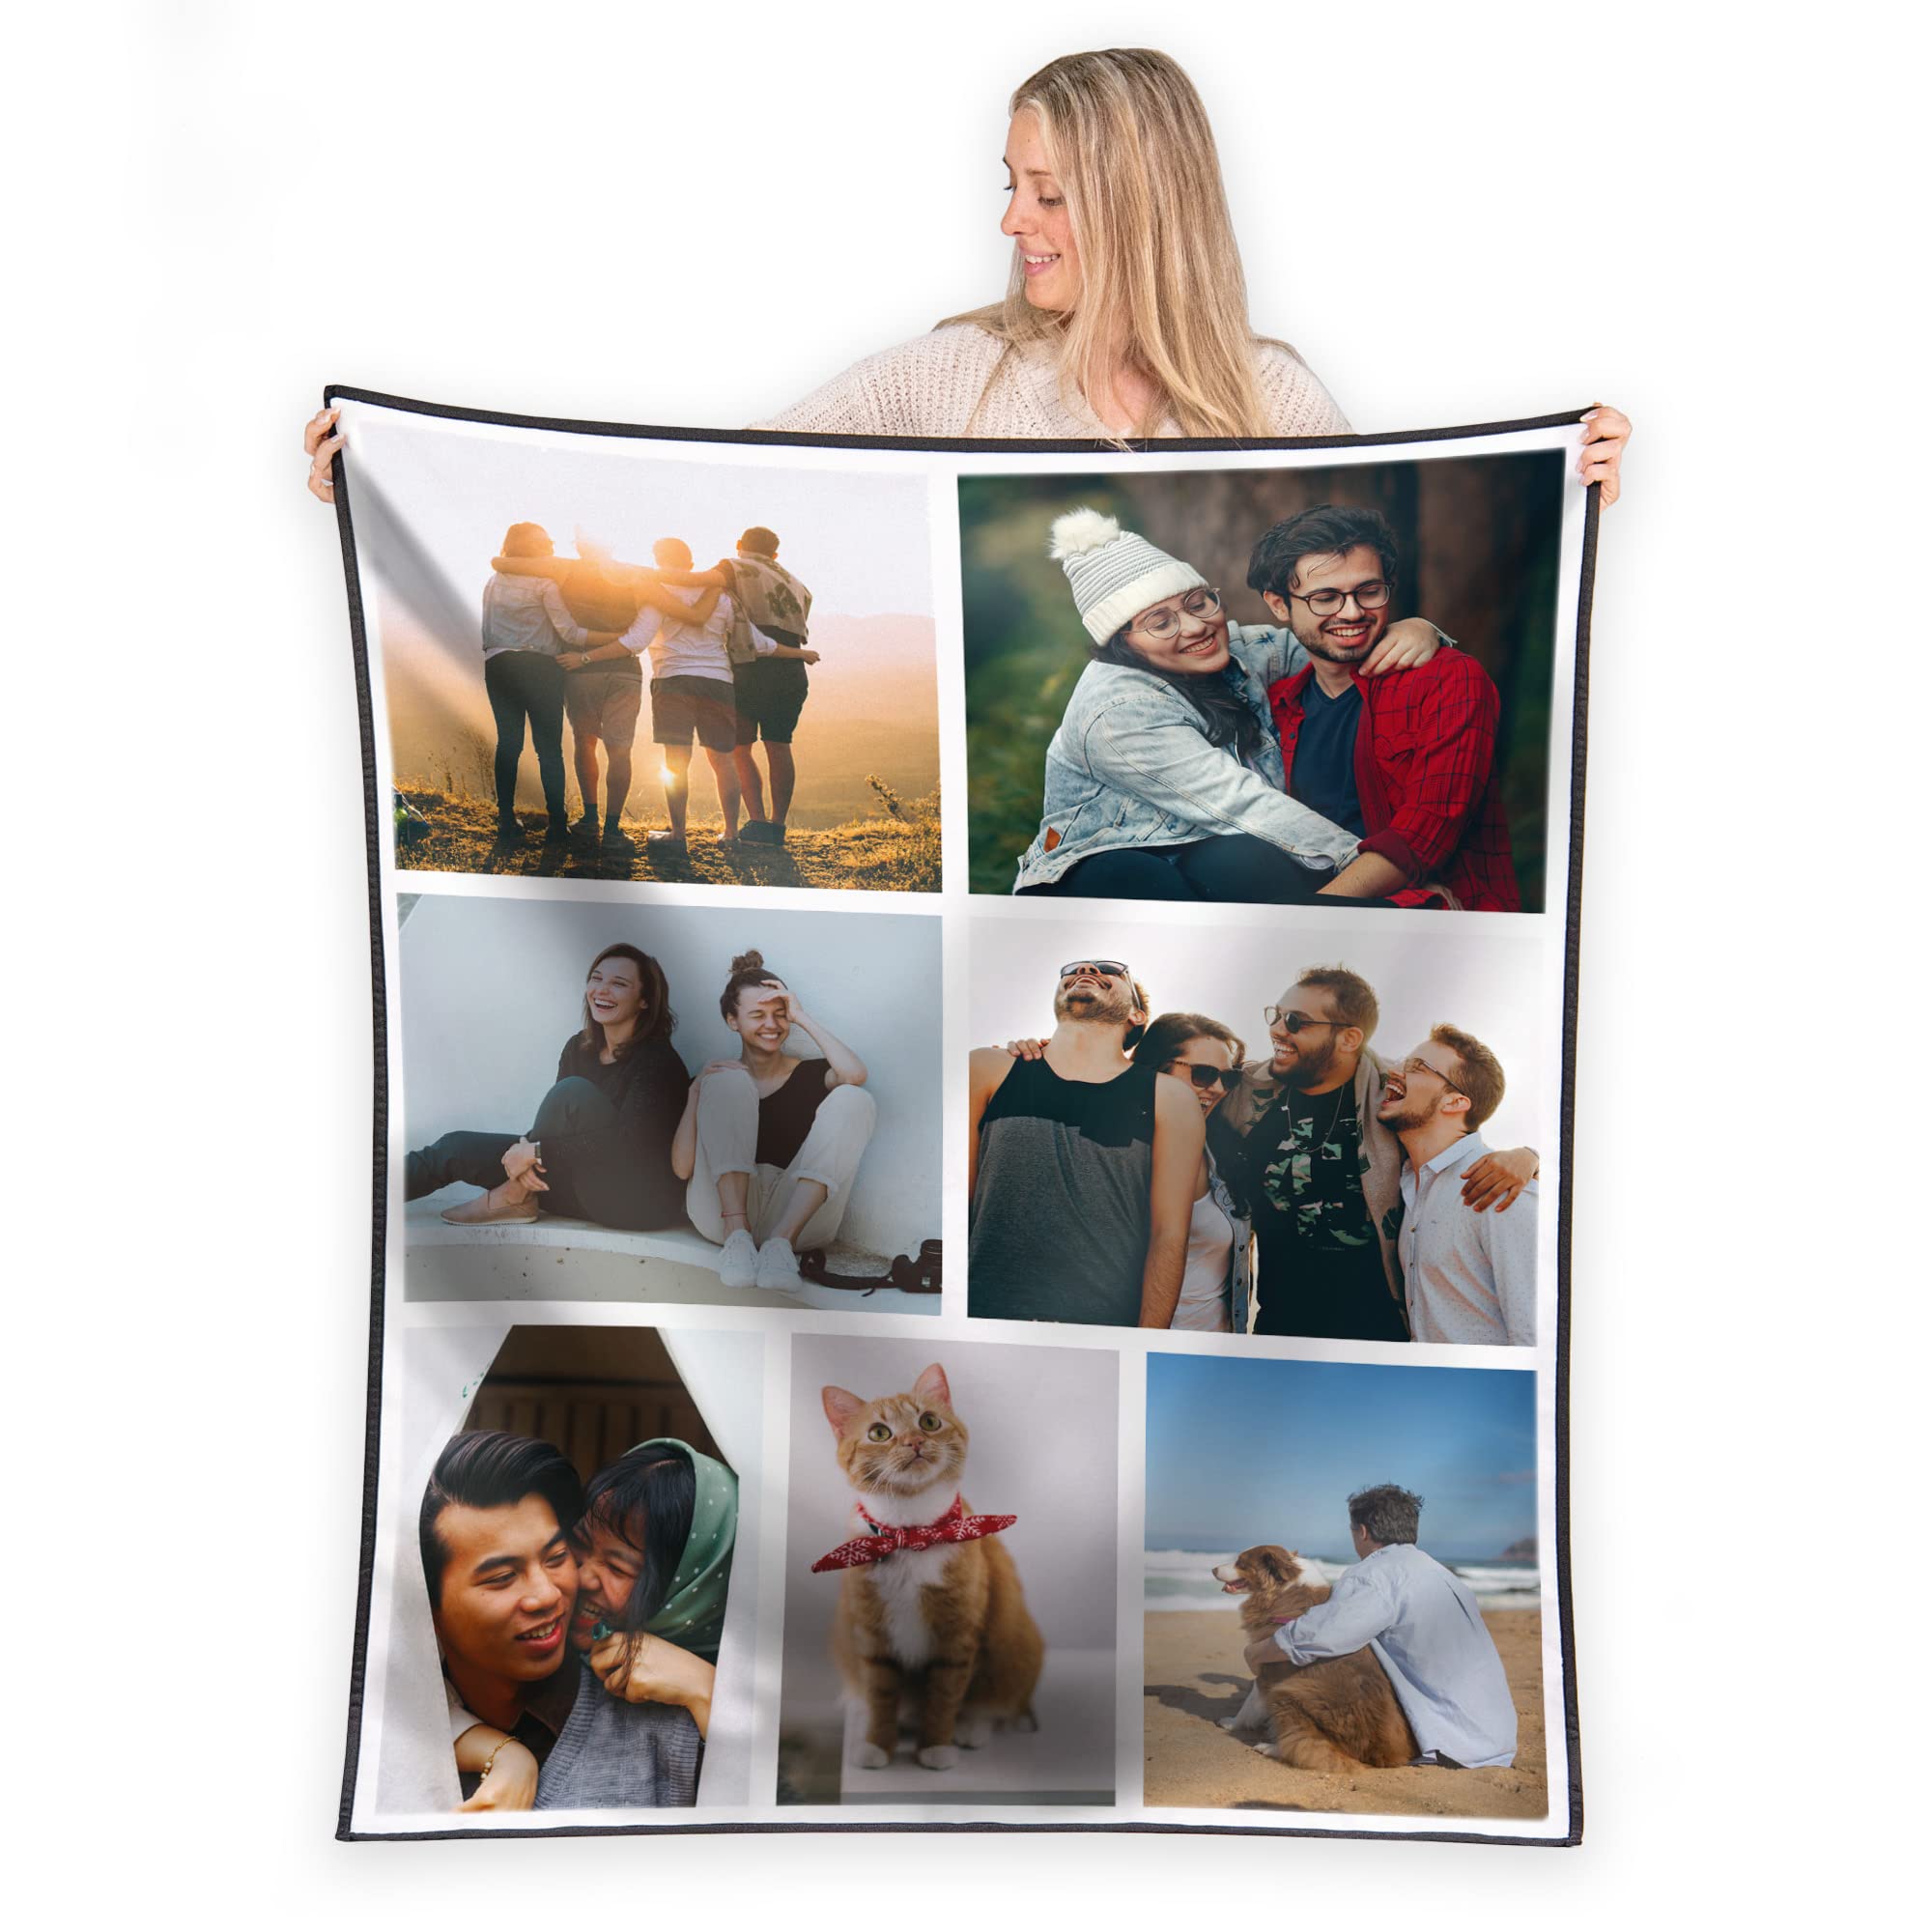 carlos gonzalez odiaga recommends blanket for outdoor photoshoot pic